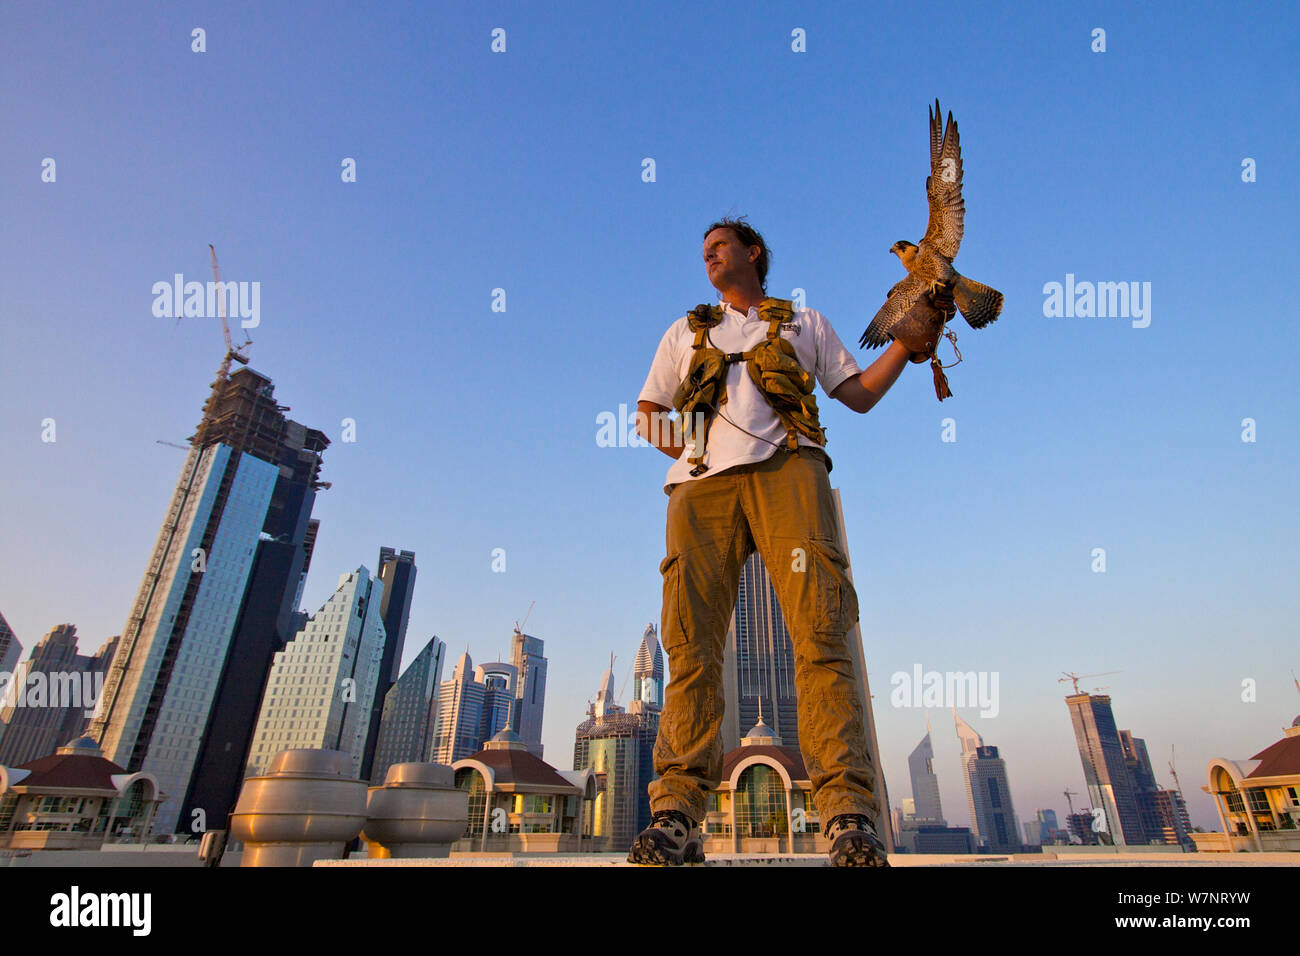 Peregrine Falcon (Falco peregrinus) perched on falconers hand, on roof top in Dubai city, used to control urban pigeon population, United Arab Emirates (UAE), January 2010 Stock Photo